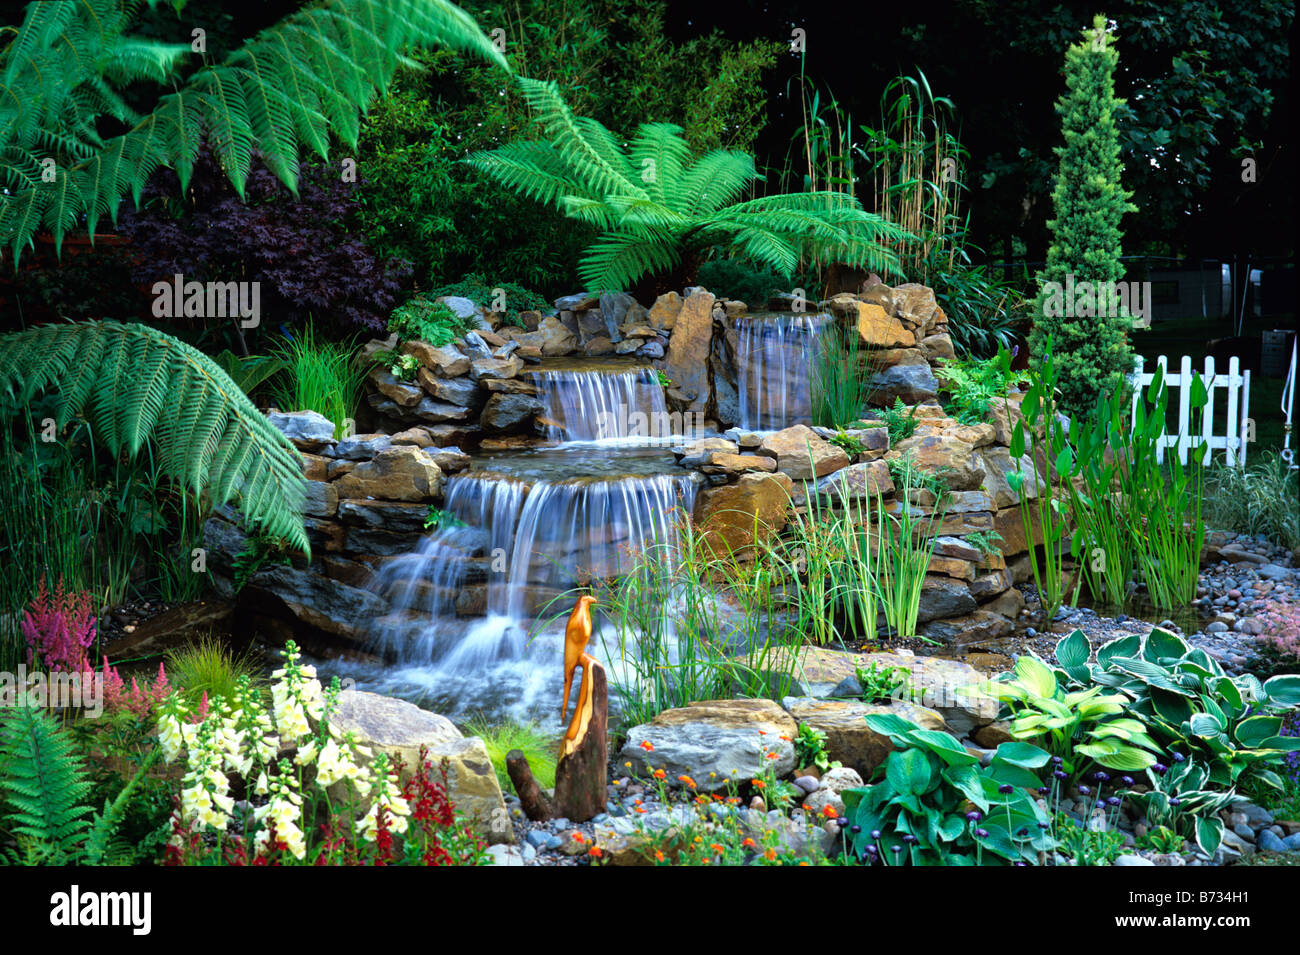 Attractive water garden with waterfalls and tree ferns Stock Photo